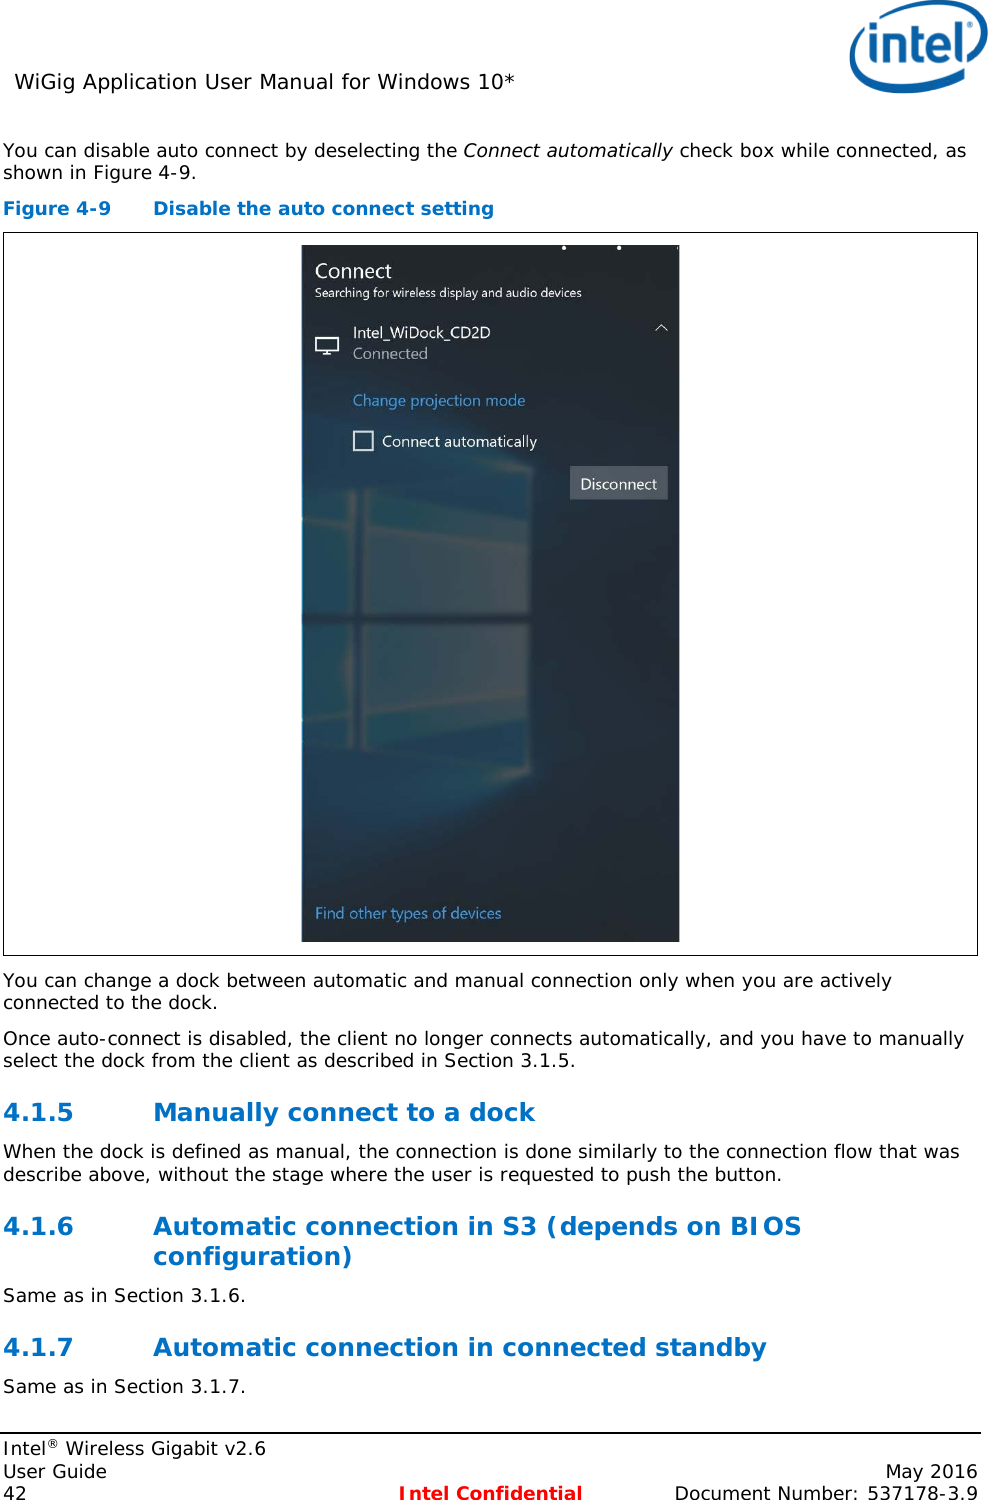 WiGig Application User Manual for Windows 10*    Intel® Wireless Gigabit v2.6 User Guide    May 2016 42 Intel Confidential Document Number: 537178-3.9 You can disable auto connect by deselecting the Connect automatically check box while connected, as shown in Figure 4-9. Figure 4-9  Disable the auto connect setting  You can change a dock between automatic and manual connection only when you are actively connected to the dock. Once auto-connect is disabled, the client no longer connects automatically, and you have to manually select the dock from the client as described in Section 3.1.5. 4.1.5 Manually connect to a dock When the dock is defined as manual, the connection is done similarly to the connection flow that was describe above, without the stage where the user is requested to push the button. 4.1.6 Automatic connection in S3 (depends on BIOS configuration) Same as in Section 3.1.6. 4.1.7 Automatic connection in connected standby Same as in Section 3.1.7. 